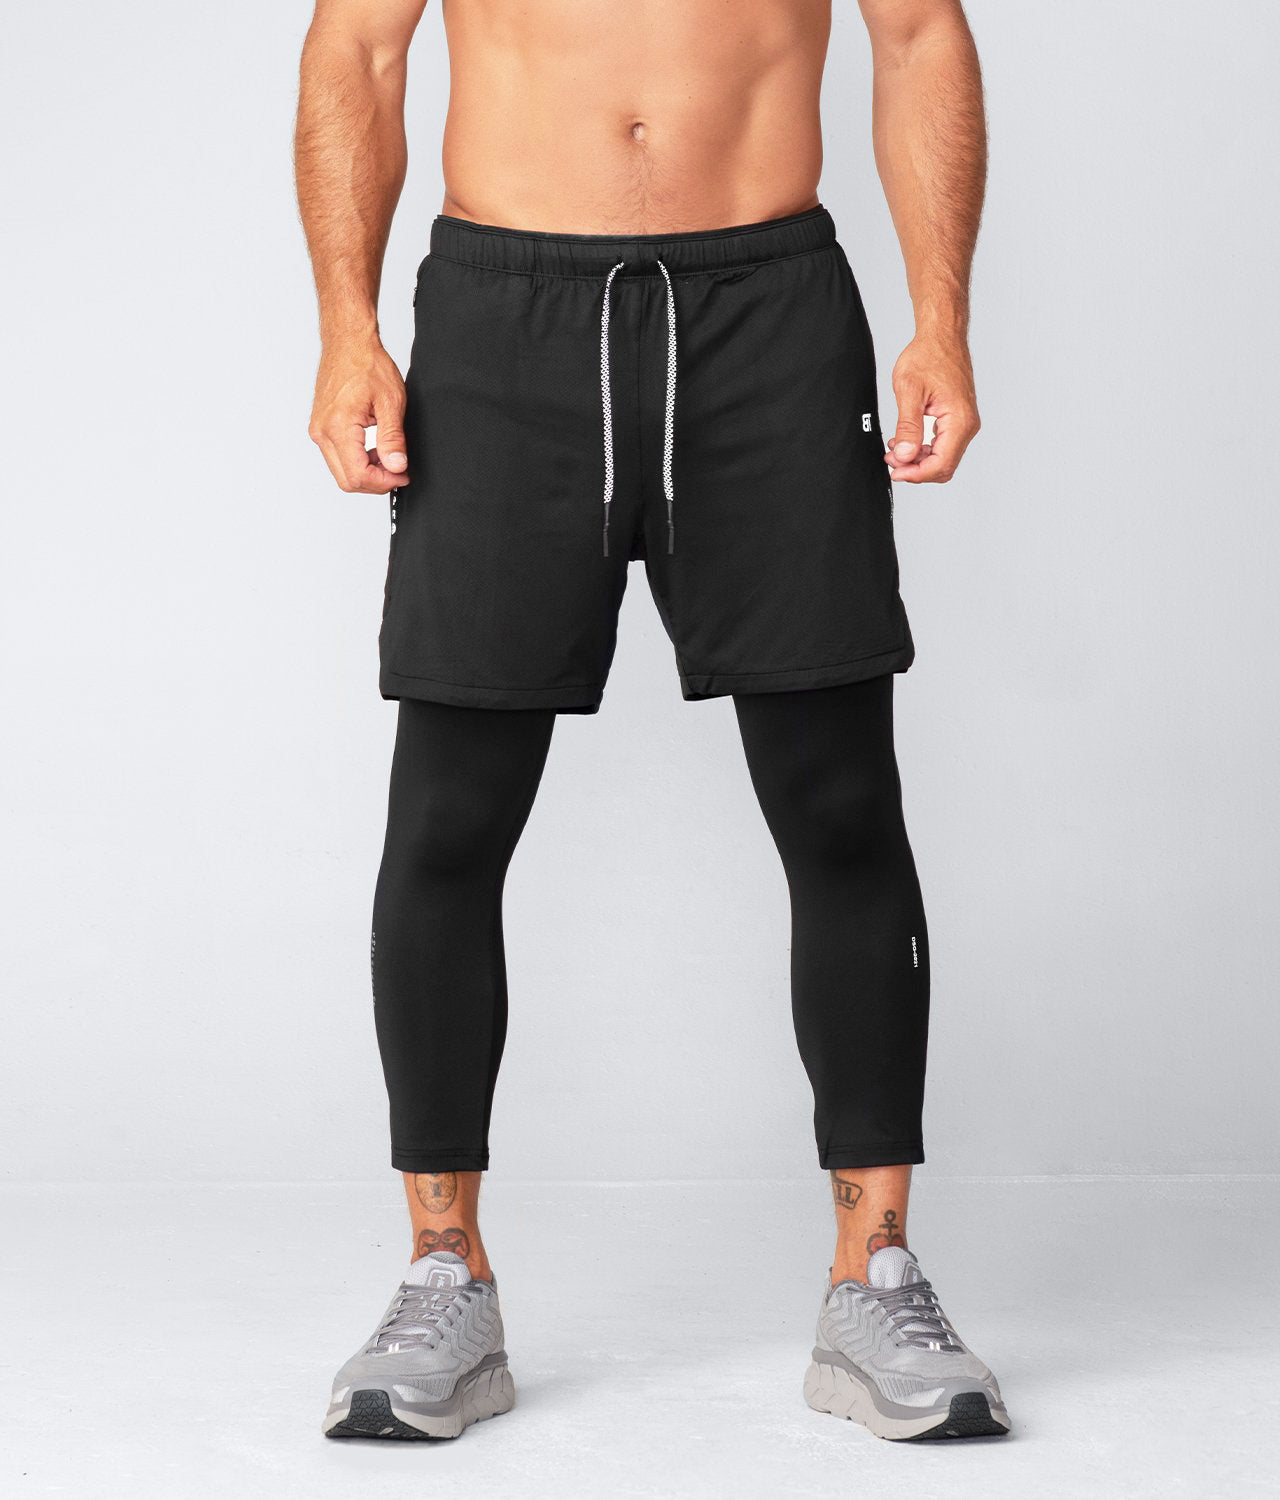 Born Tough Air Pro™ Men's 2 in 1 Black Gym Workout Shorts With Legging Liner